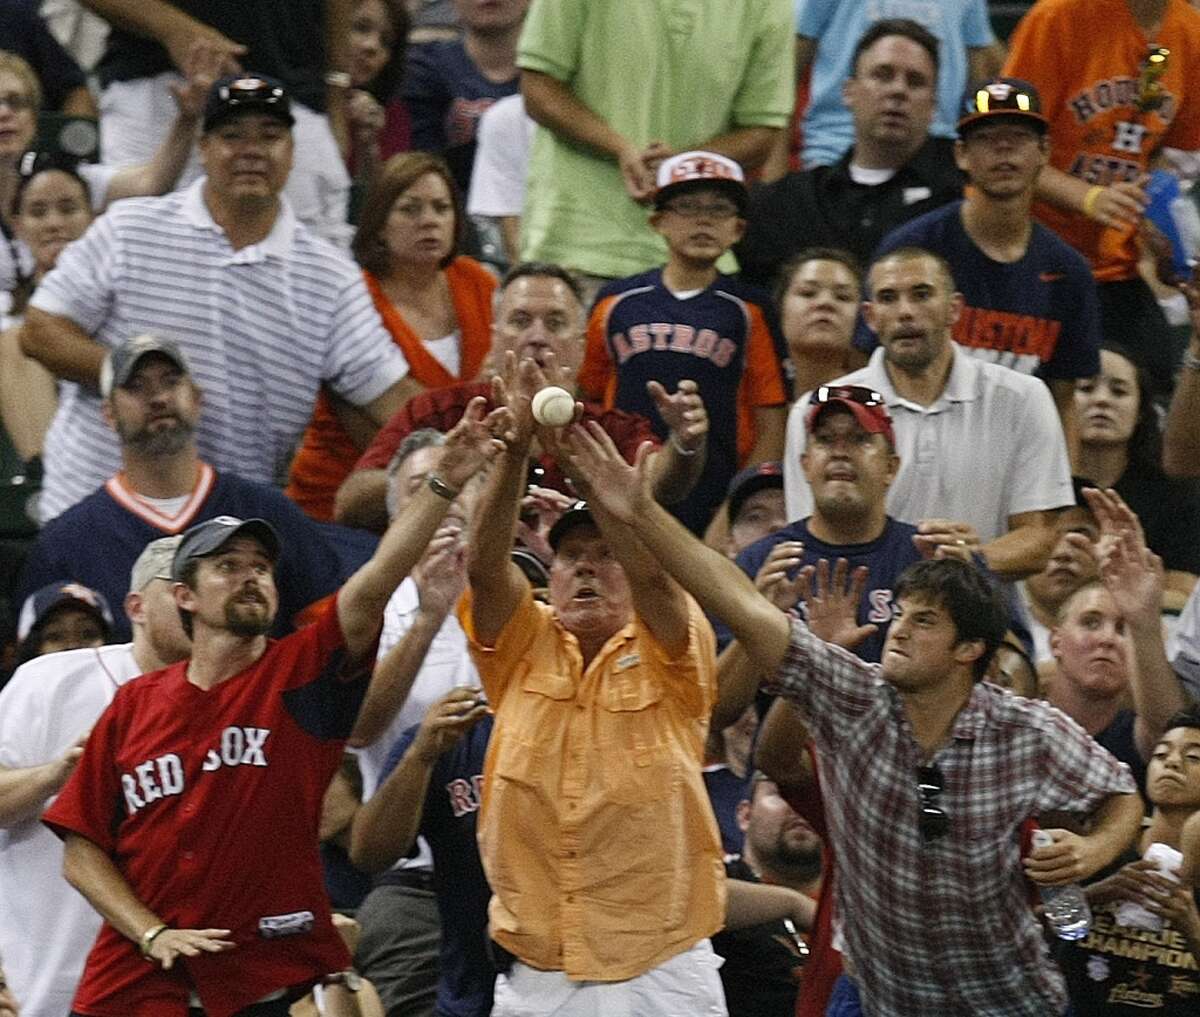 Do the Yankees have the most bandwagon fans in all of sports? - Quora